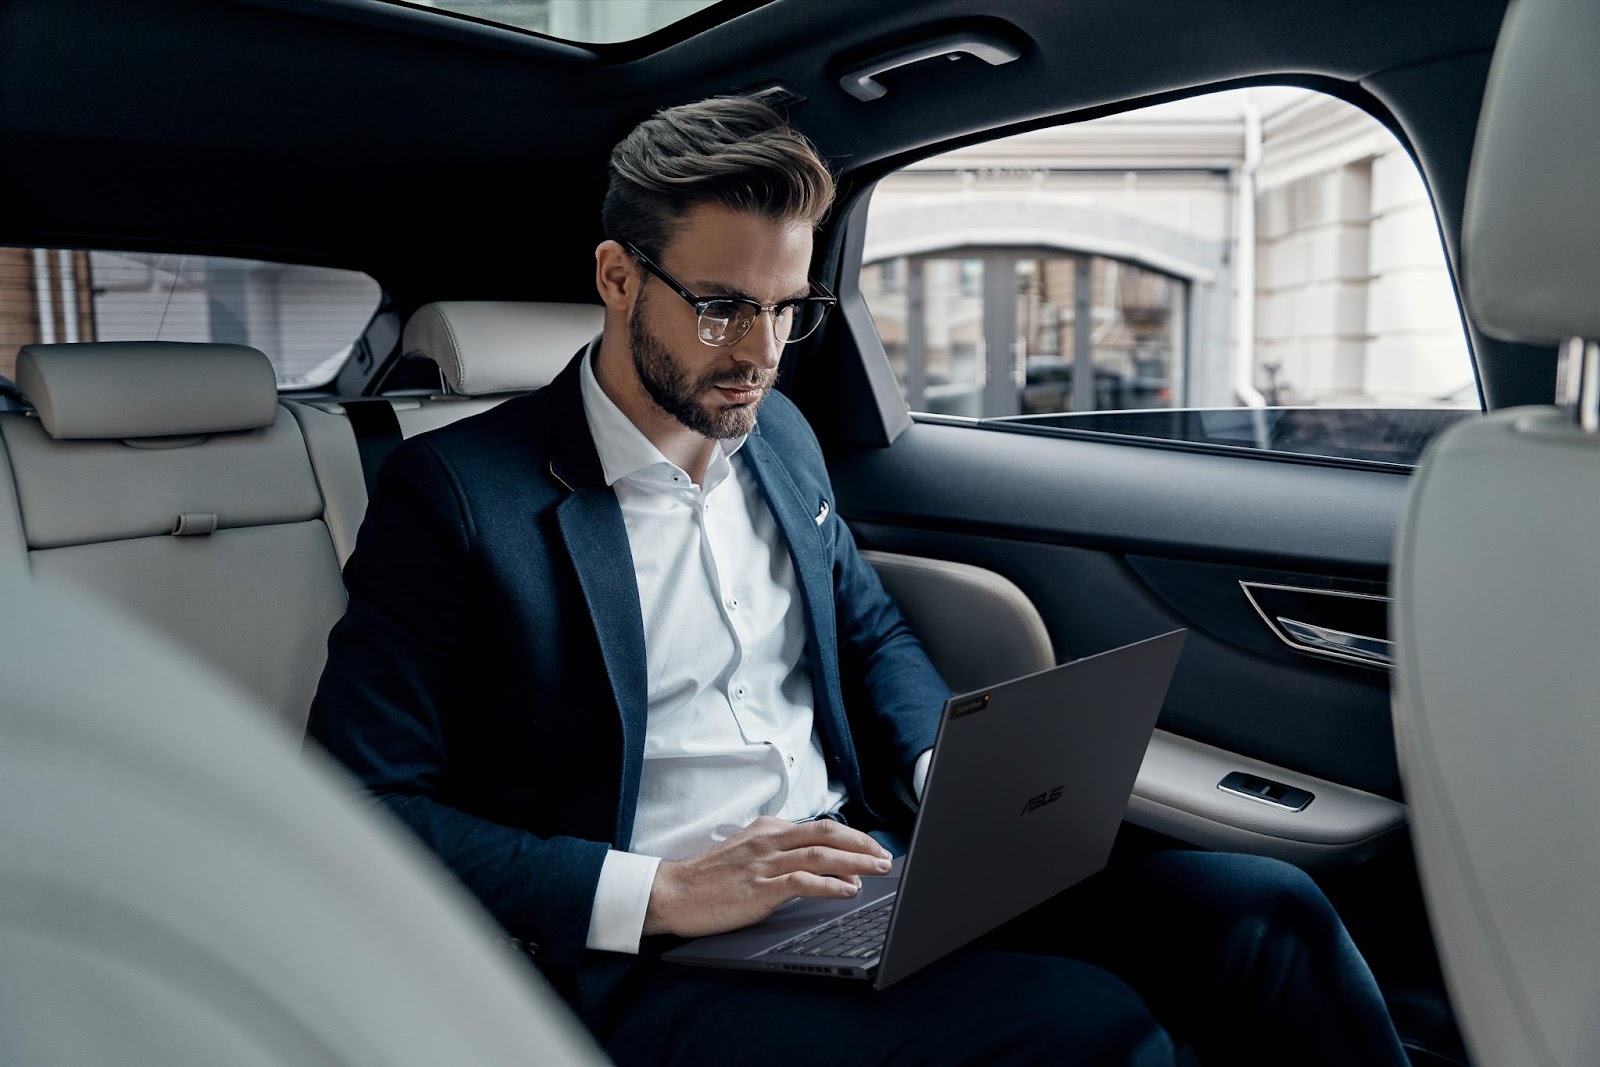 A person in a suit and glasses sitting in a car using a computerDescription automatically generated